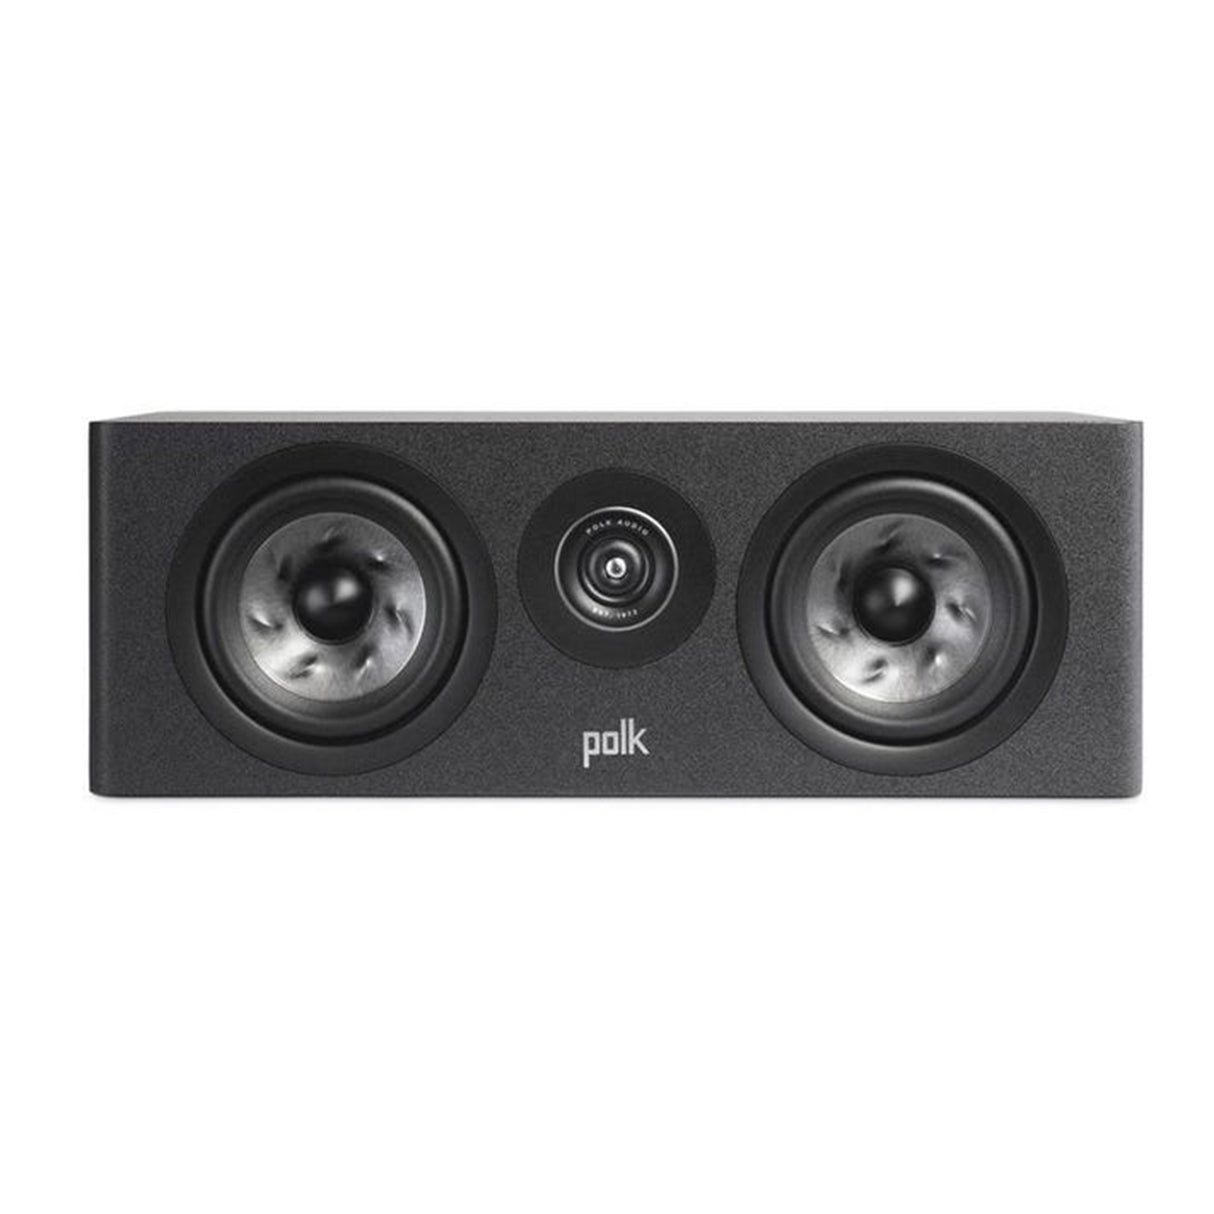 Polk Audio Reserve 3.0 Channel- Reserve 100 Compact Bookshelf Speaker + Reserve 300 Compact Center Channel Speaker Home Theater Speaker Bundle Package